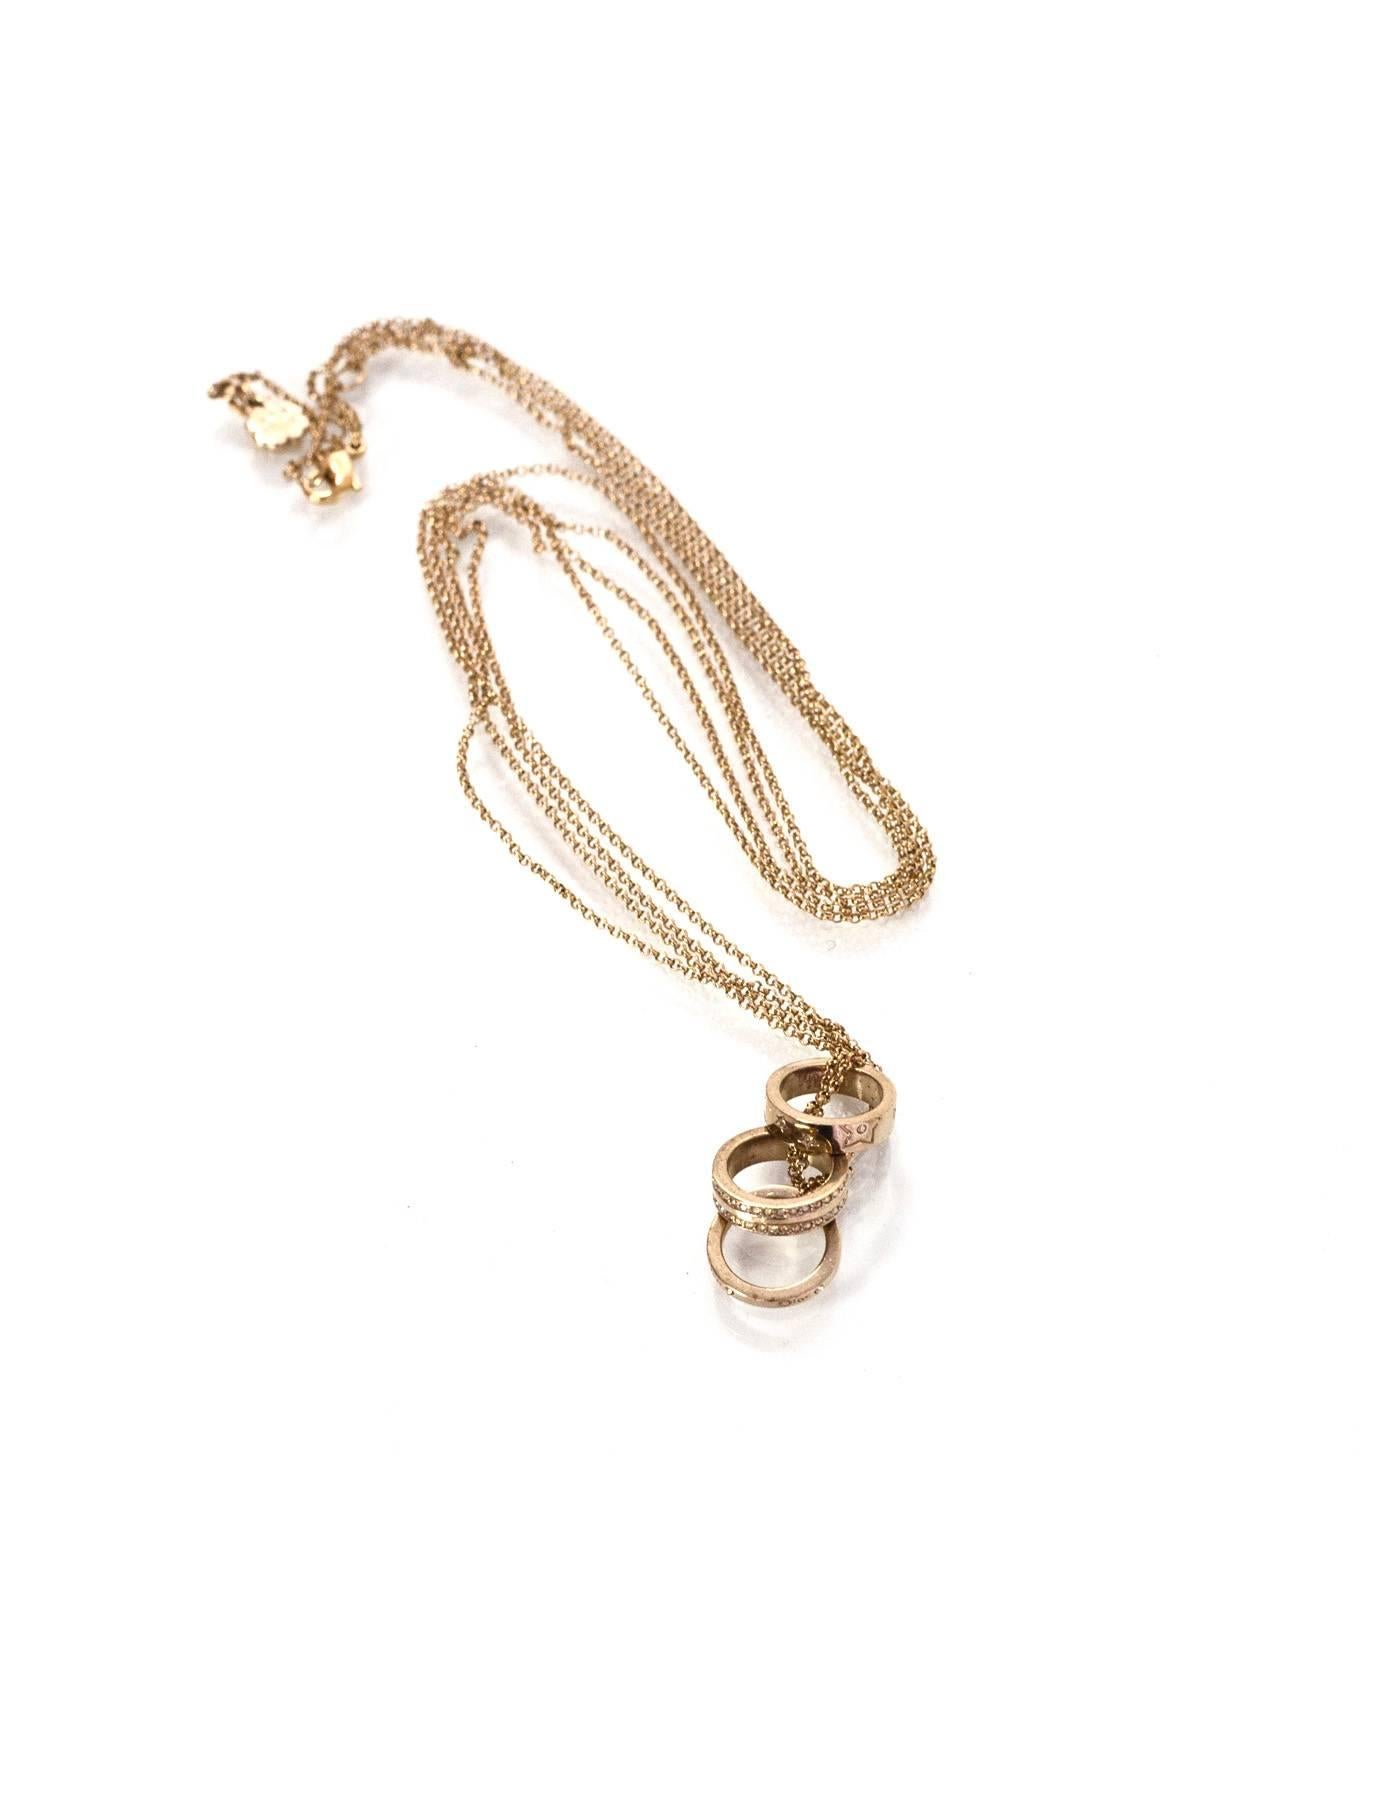 Christian Dior Gold Double Chain 3 Ring Necklace 
Features 3 rings with crystals, stars and dior logo

Color: Goldtone
Materials: Metal and crystal
Closure: Lobster claw clasp
Stamp: Dior
Overall Condition: Excellent pre-owned condition with the